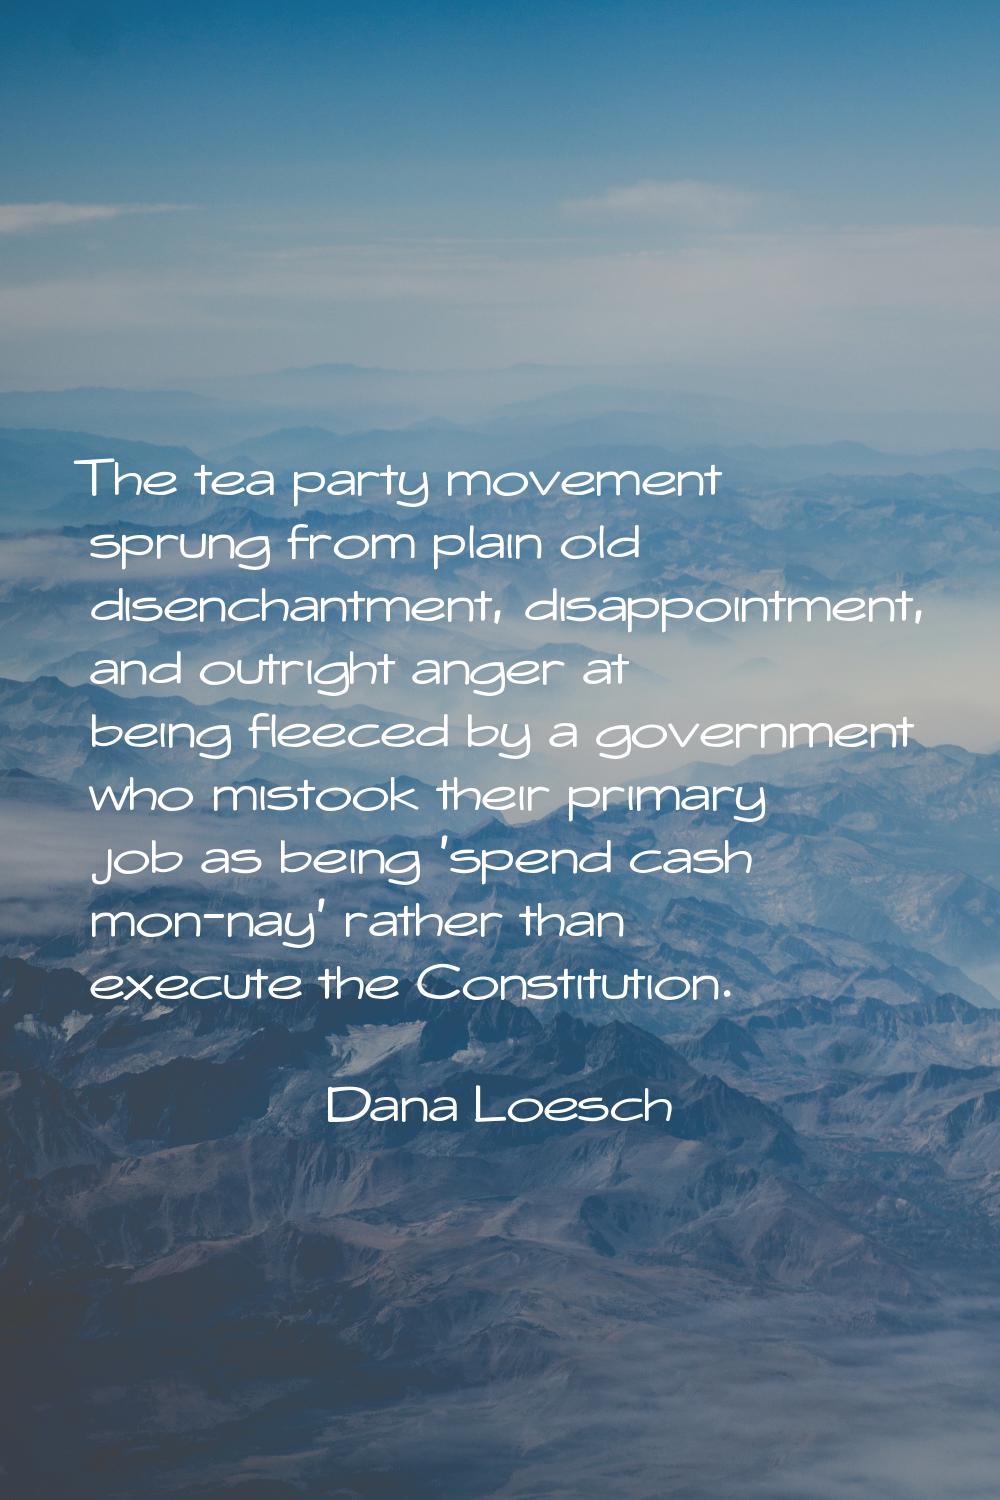 The tea party movement sprung from plain old disenchantment, disappointment, and outright anger at 